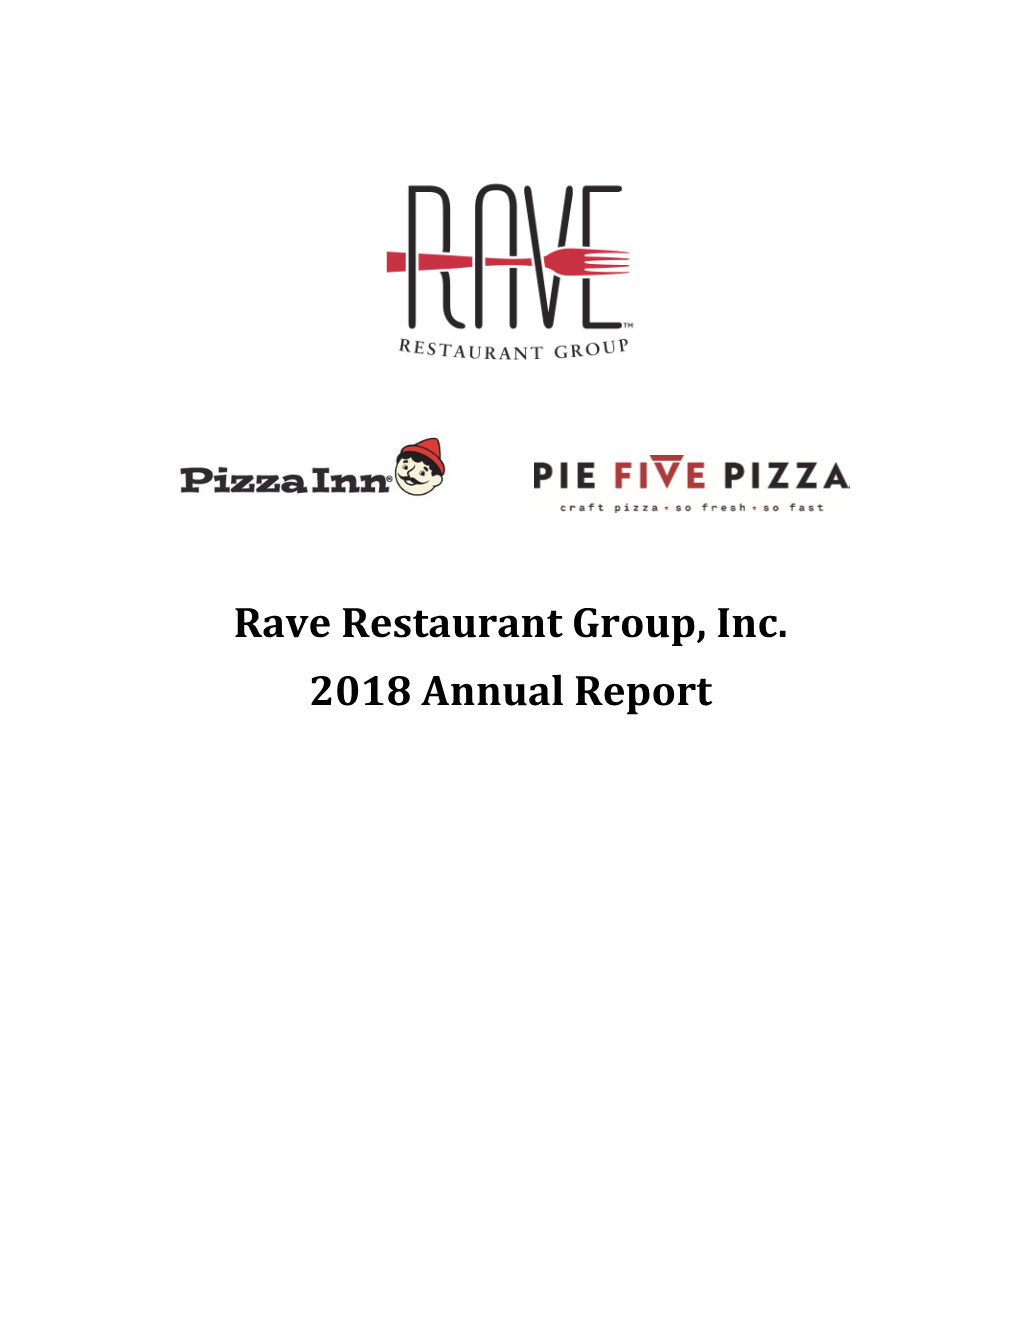 Rave Restaurant Group, Inc. 2018 Annual Report